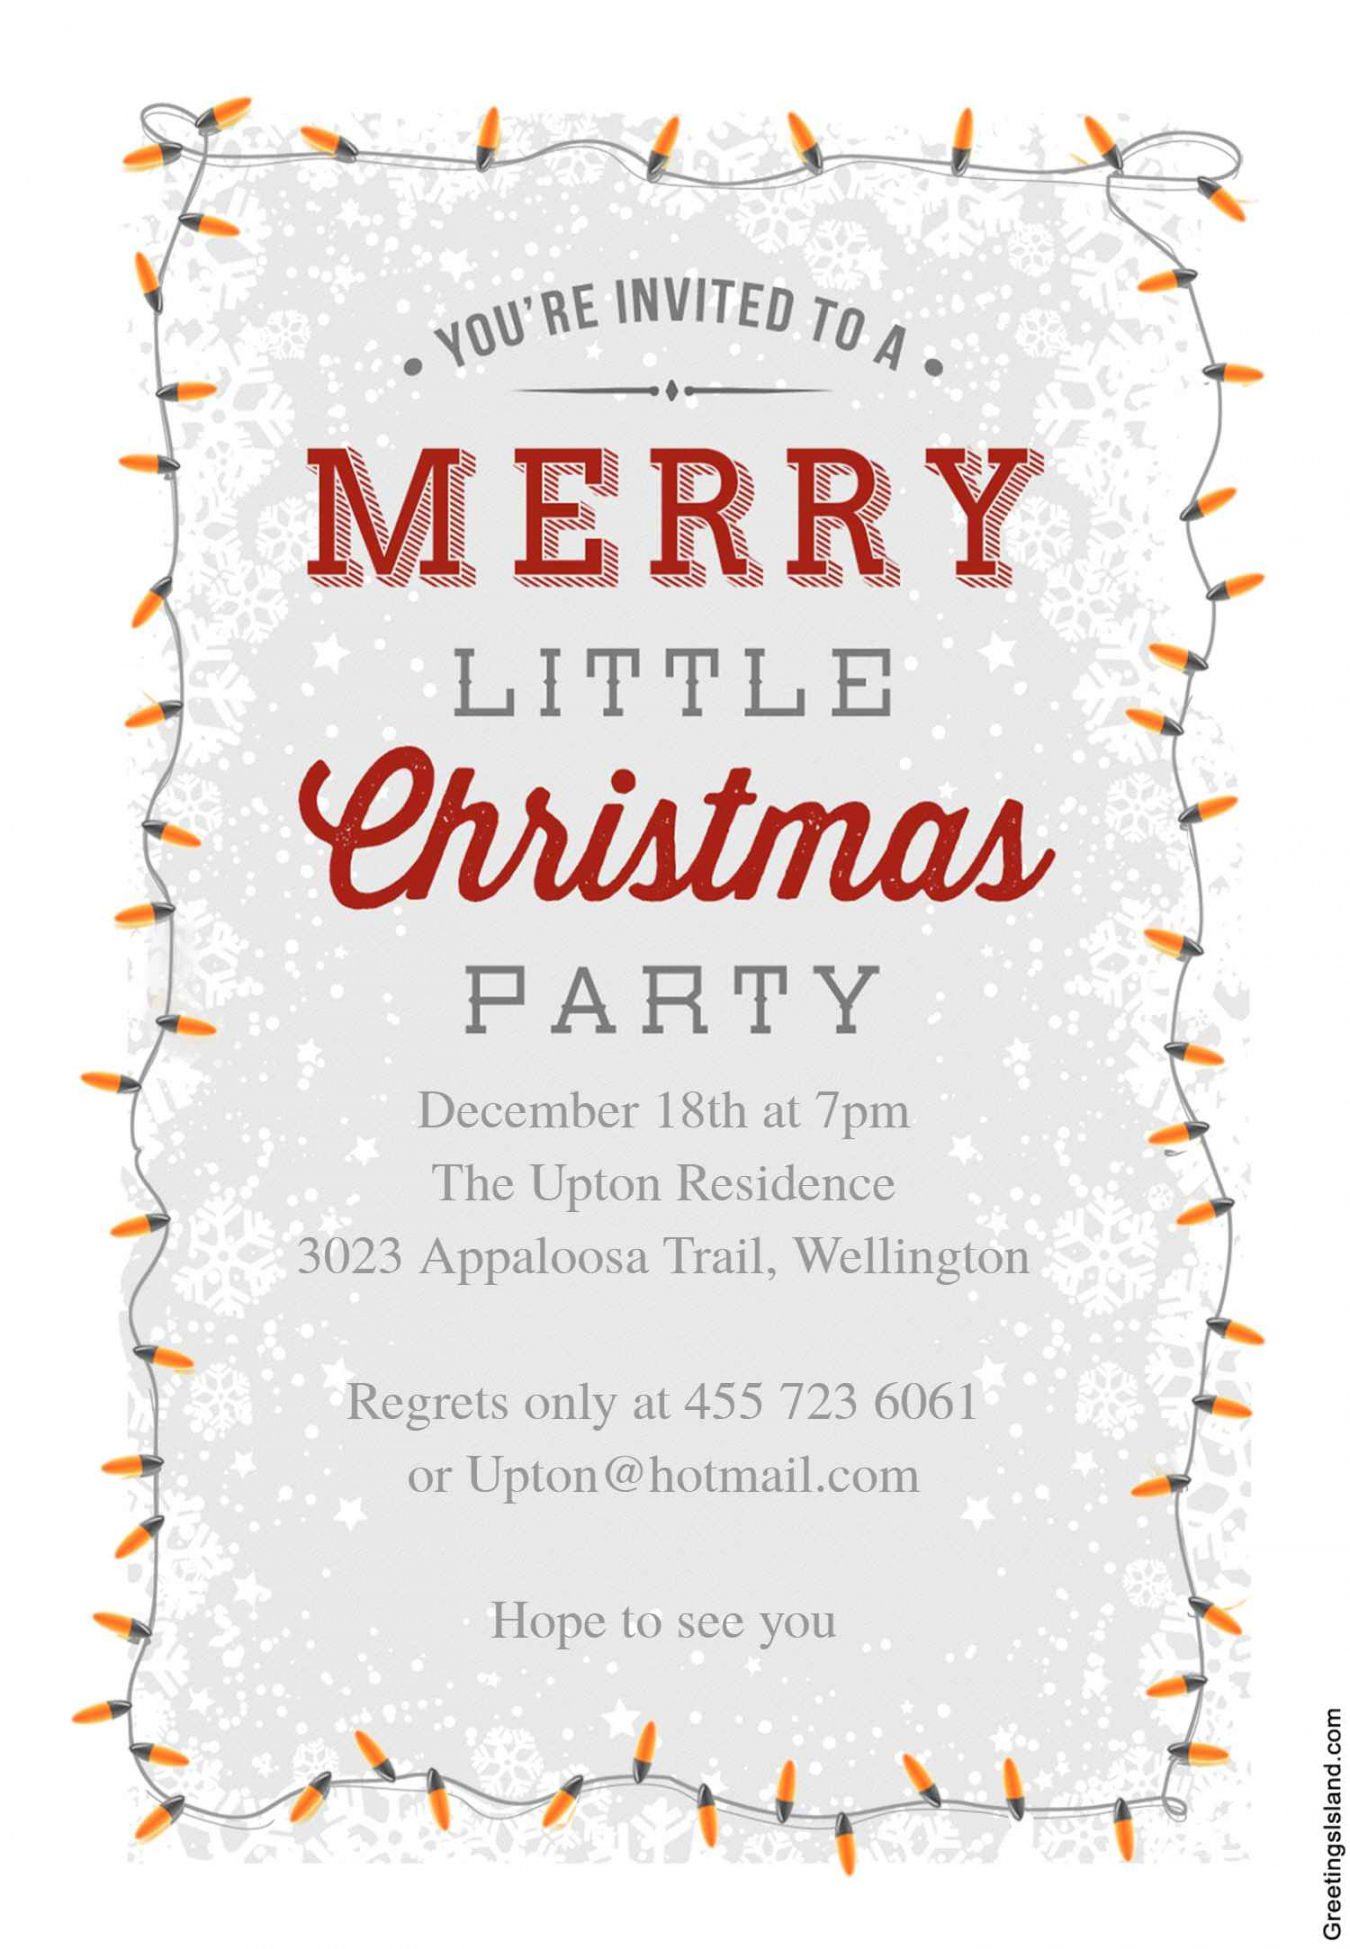 Free Christmas Party Invitations That You Can Print - FREE Printables - Free Printable Christmas Invitations